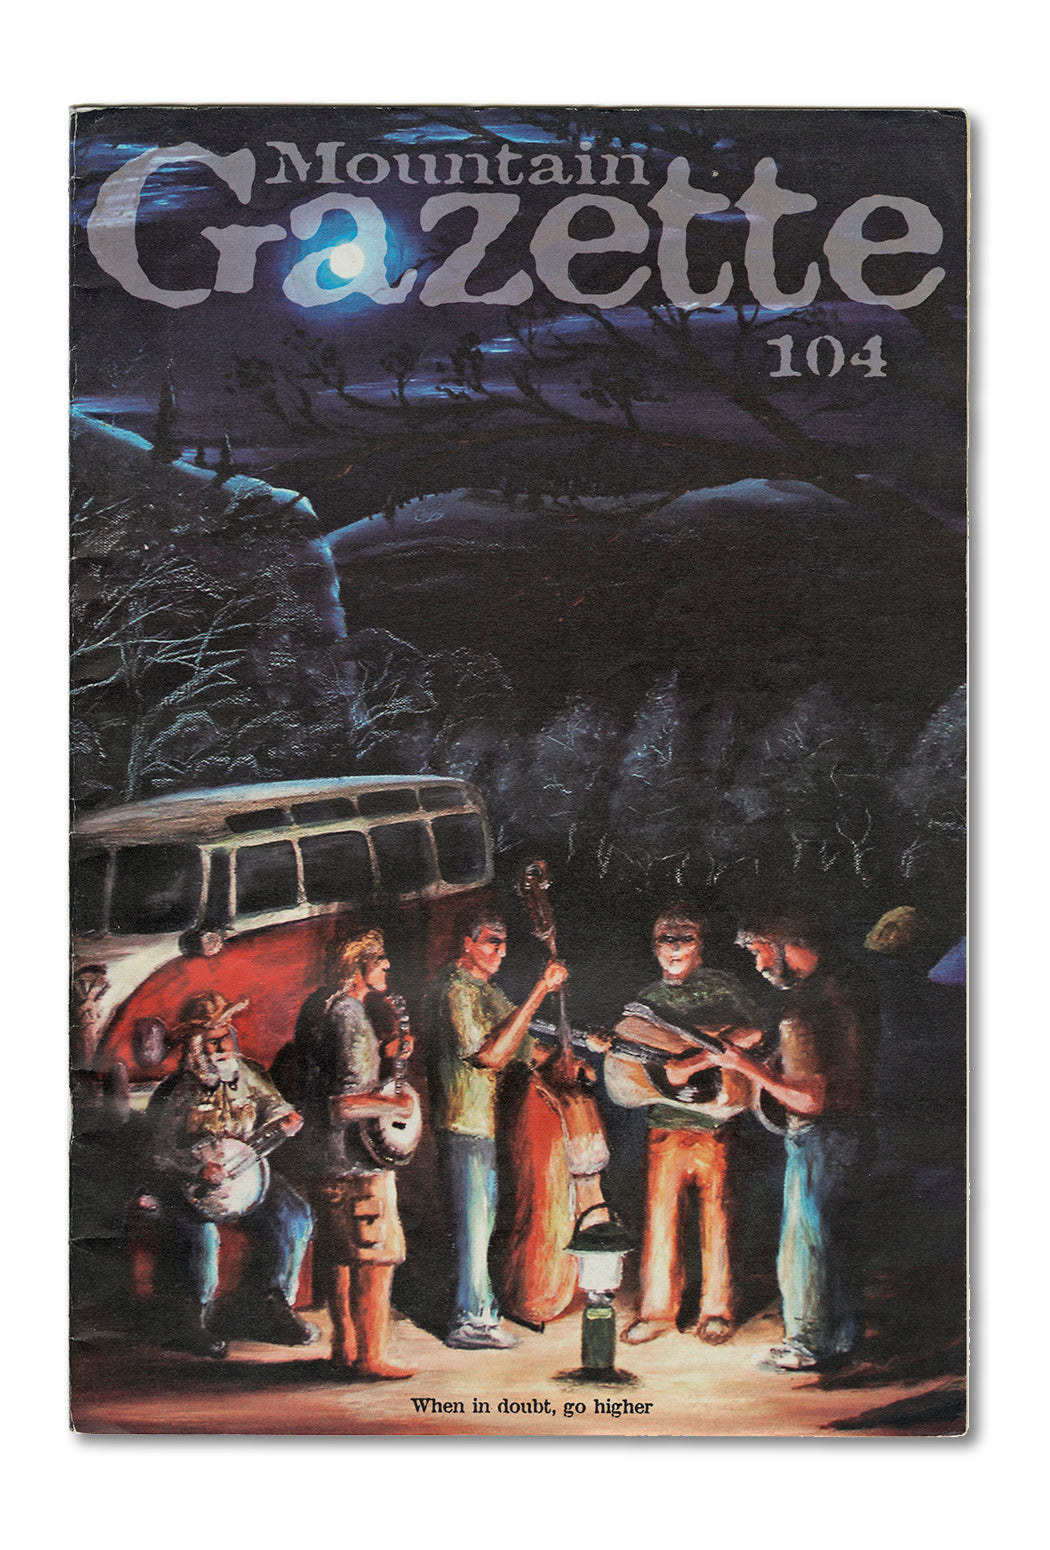 Vintage magazine cover art from issue 104 of Mountain Gazette magazine